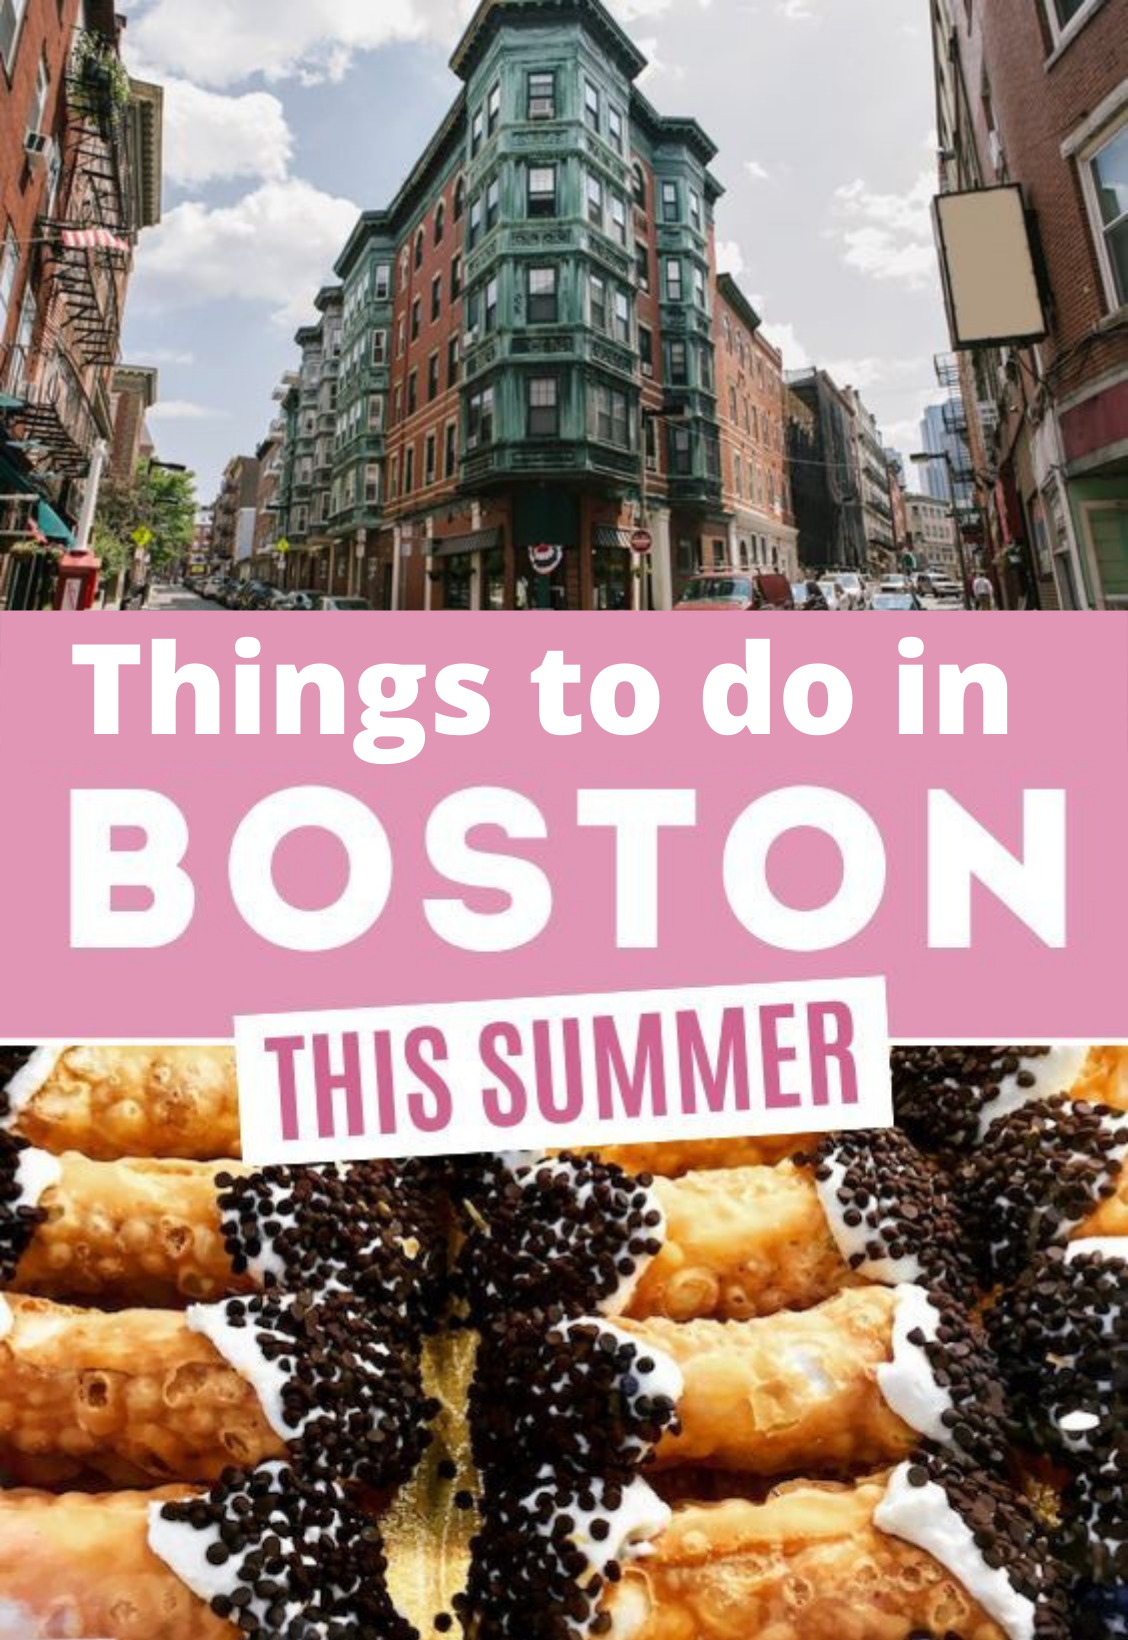 Things to Do in Boston on summer